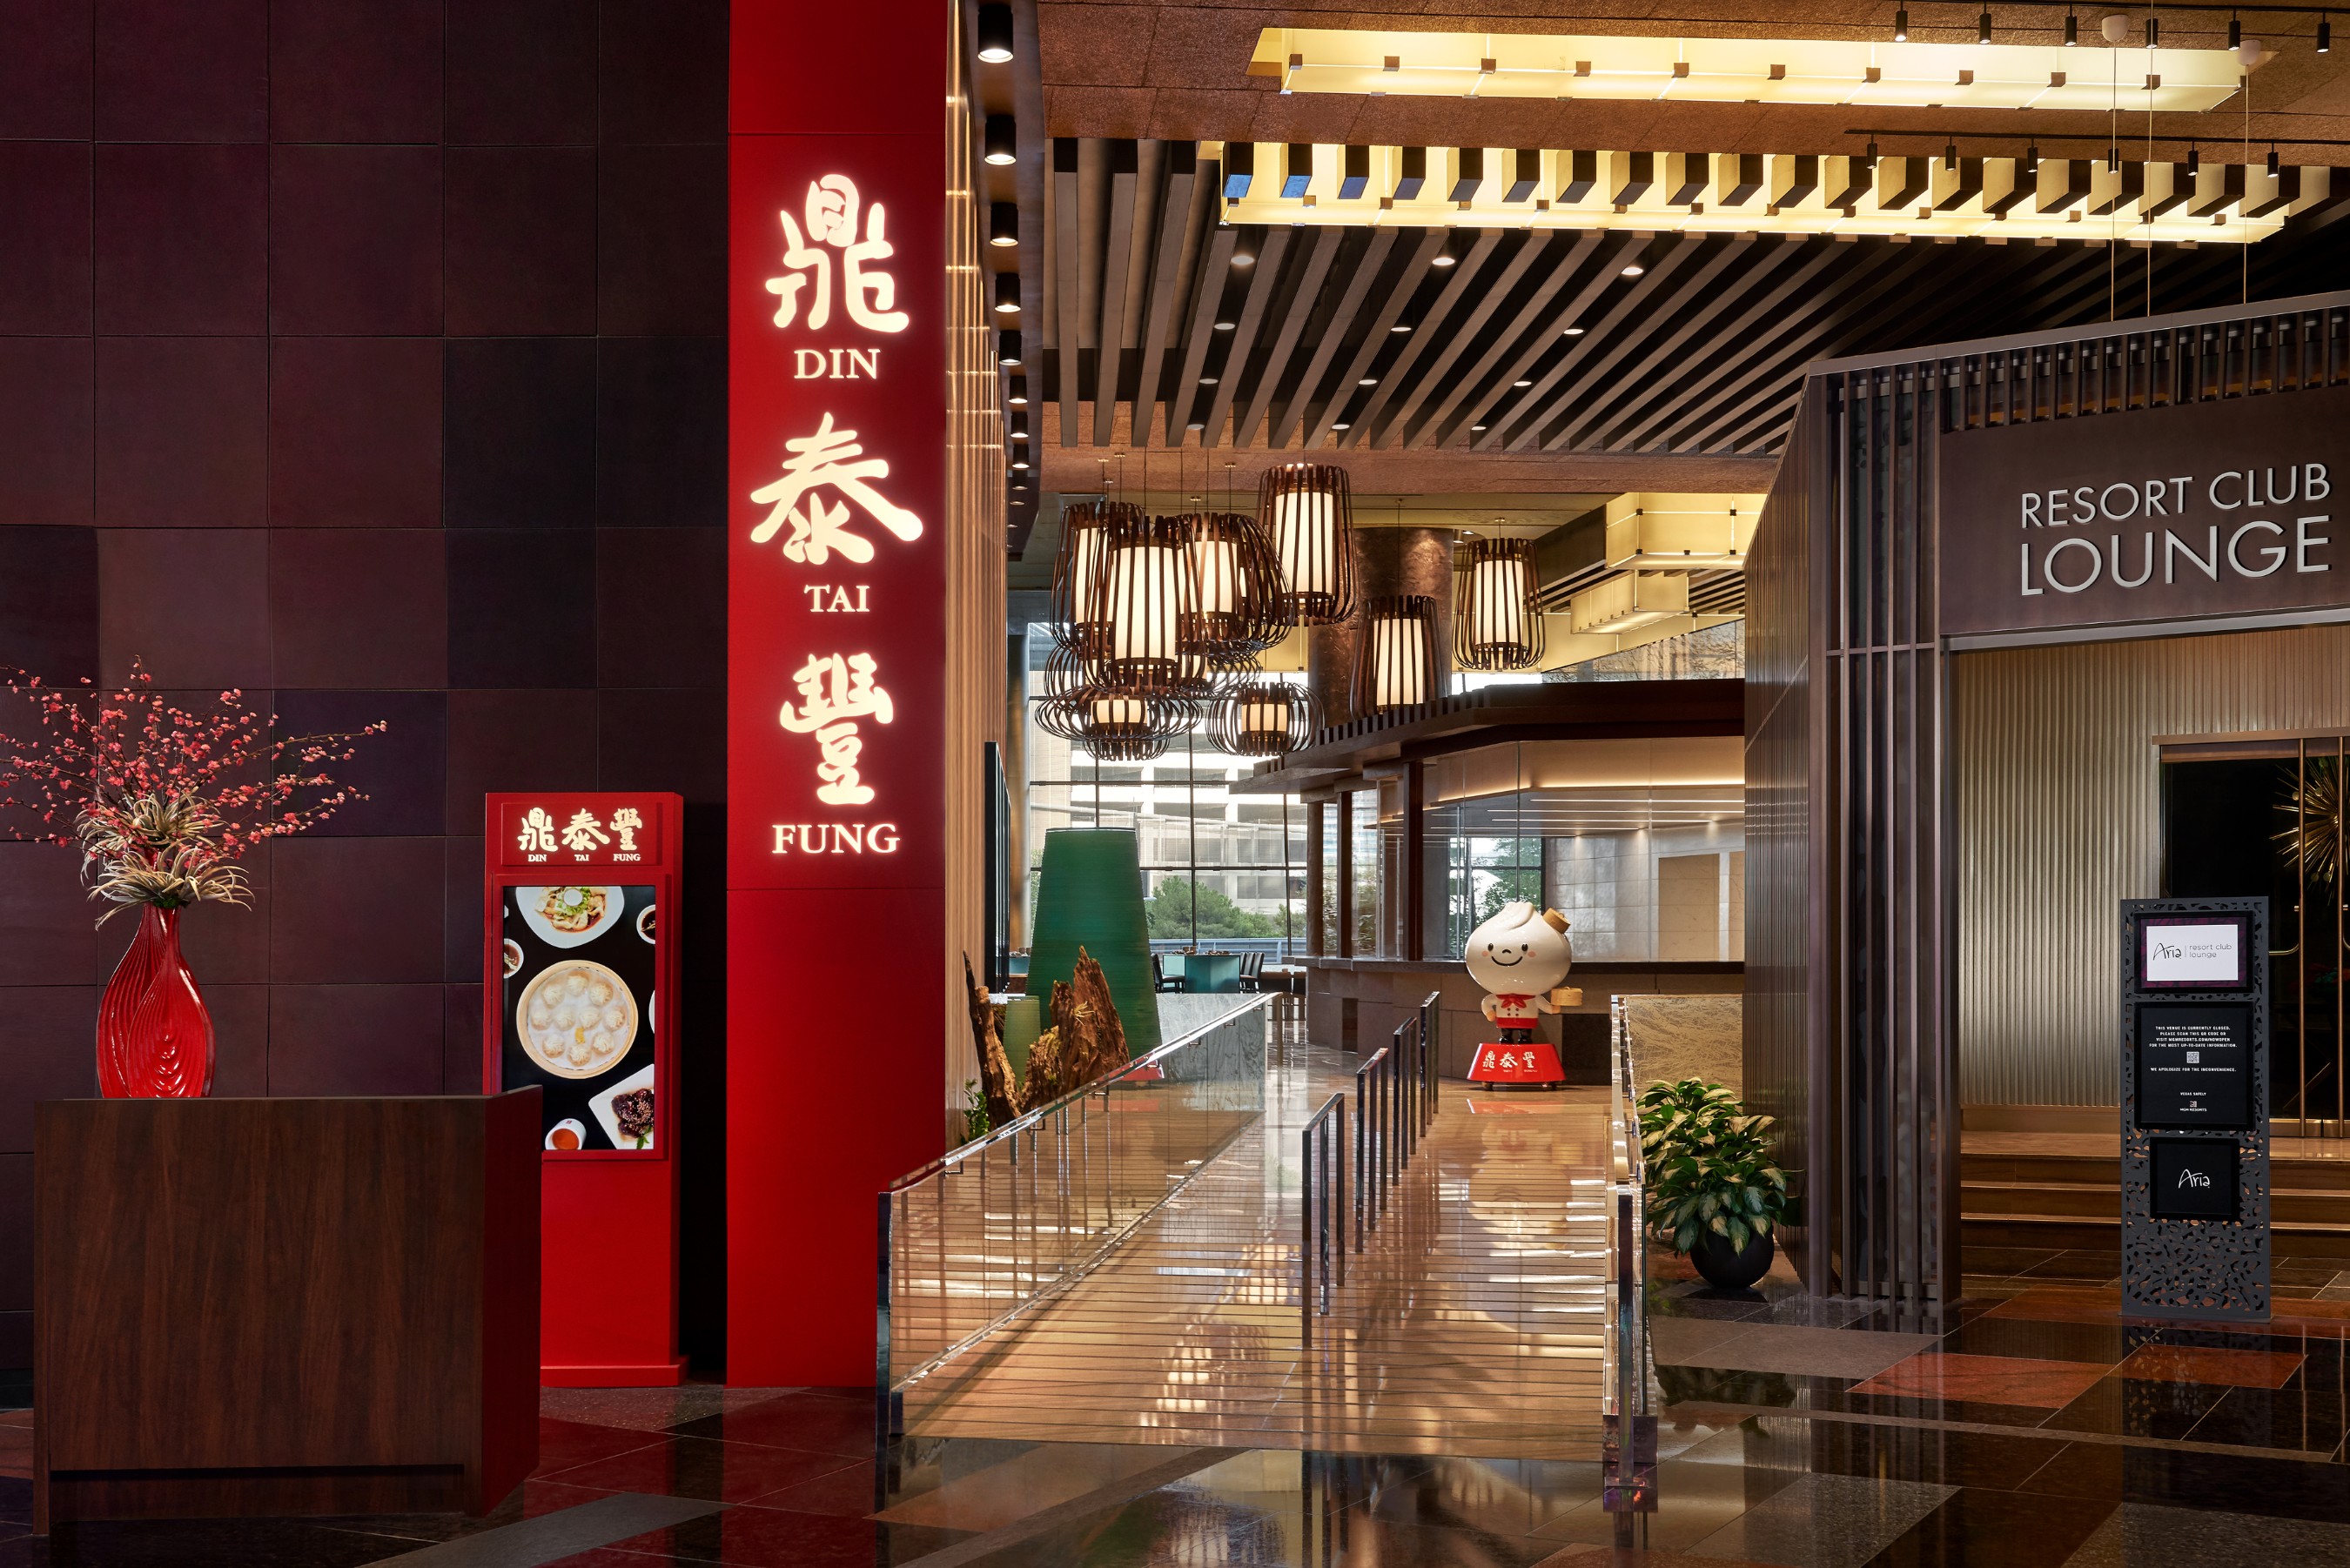 Upon entering the venue, guests will be greeted by Din Tai Fung’s signature show kitchen where the culinary team will create 10,000 dumplings each day.